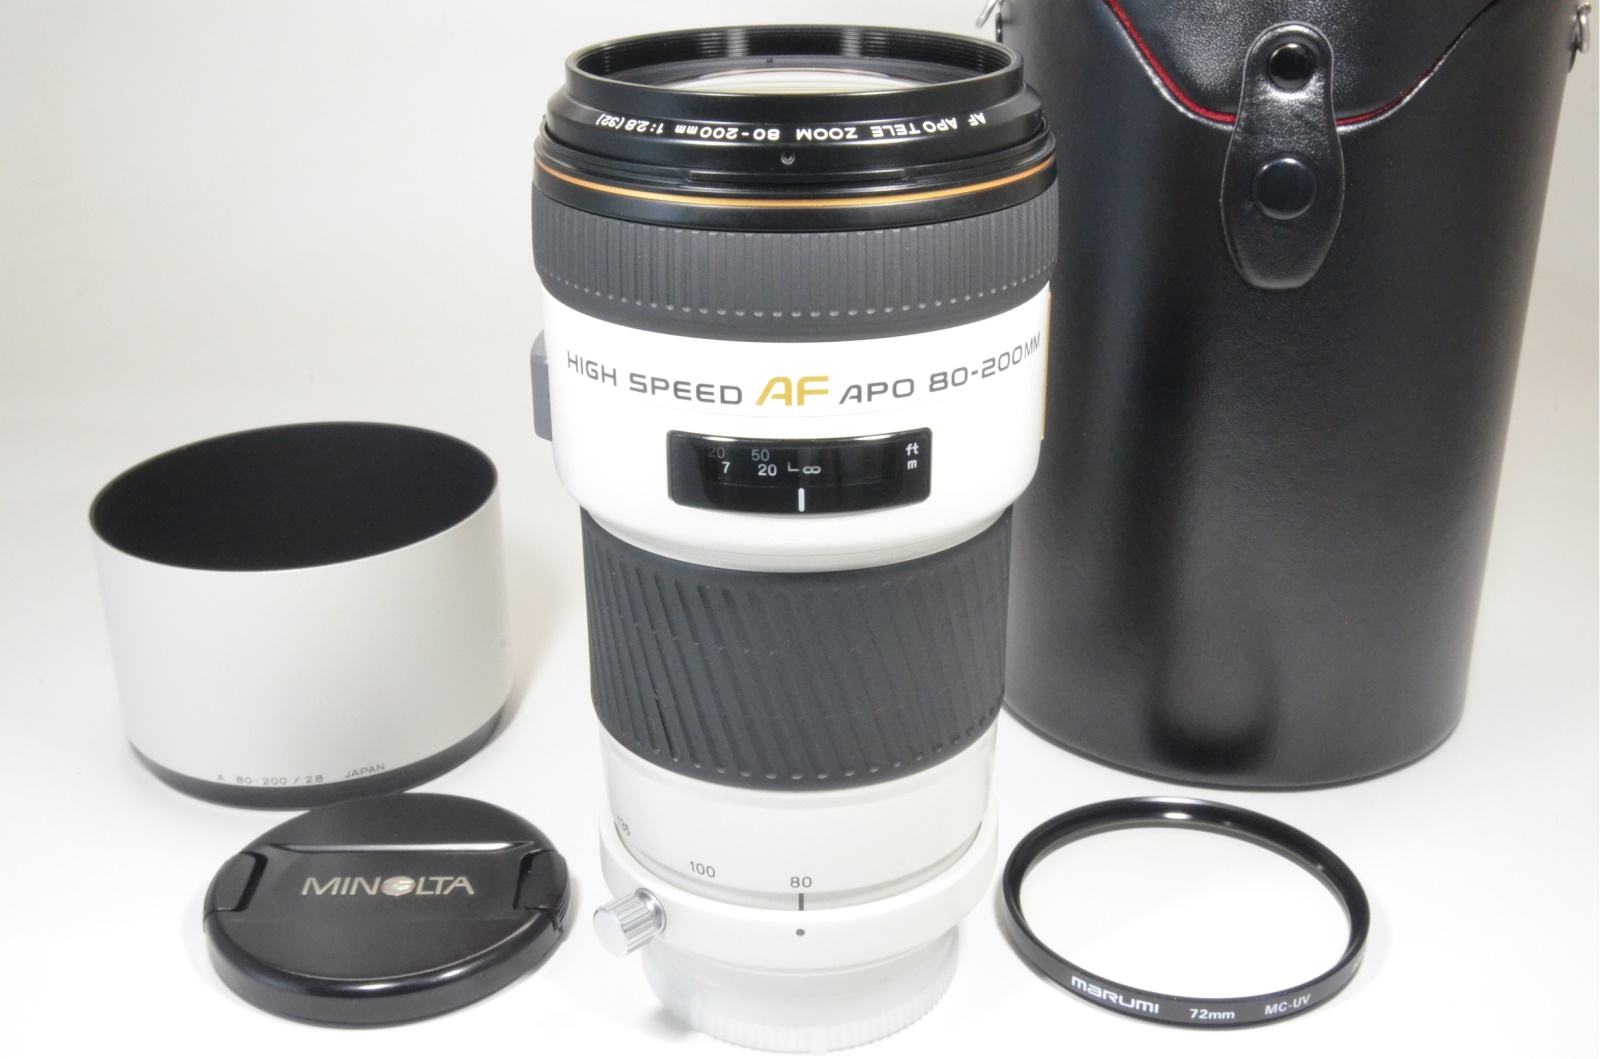 minolta high speed af apo 80-200mm f2.8 g lens sony japan with case